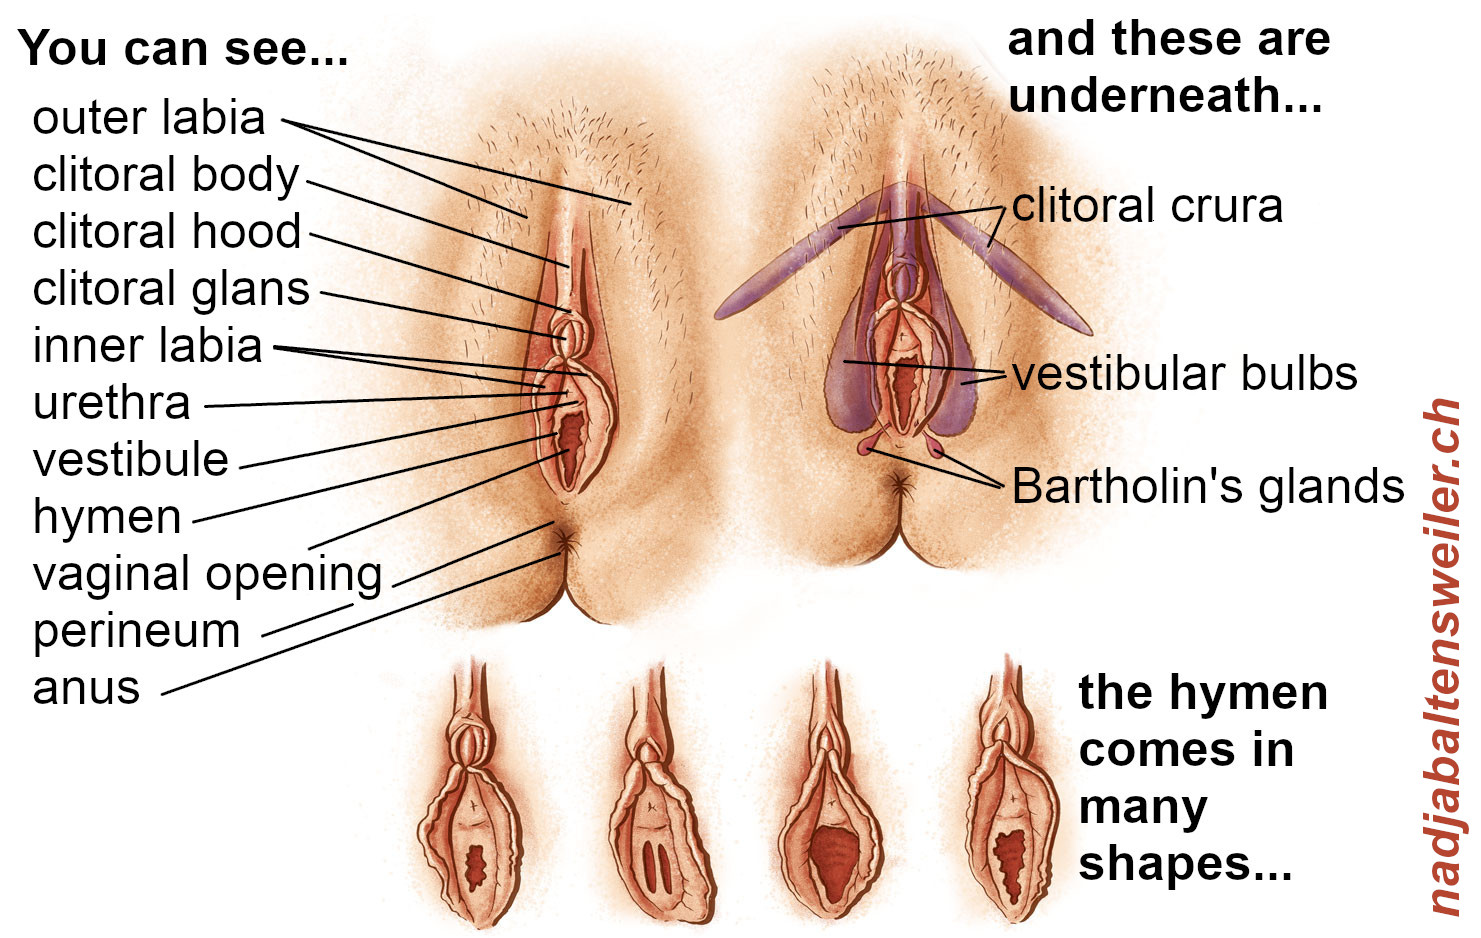 You see a total of 6 illustrations of vulvas - 2 larger ones at the top and 4 smaller ones at the bottom. The top left image is labeled: You can see... - outer labia - clitoral body - clitoral hood - clitoral glans - inner labia  - urethra - vestibule - vaginal opening - hymen - perineum - anus The top right image is labeled: and these are underneath... - clitoral crura - vestubular bulbs - Bartholin's glands The bottom 4 illustrations are labeled: The hymen comes in many shapes...